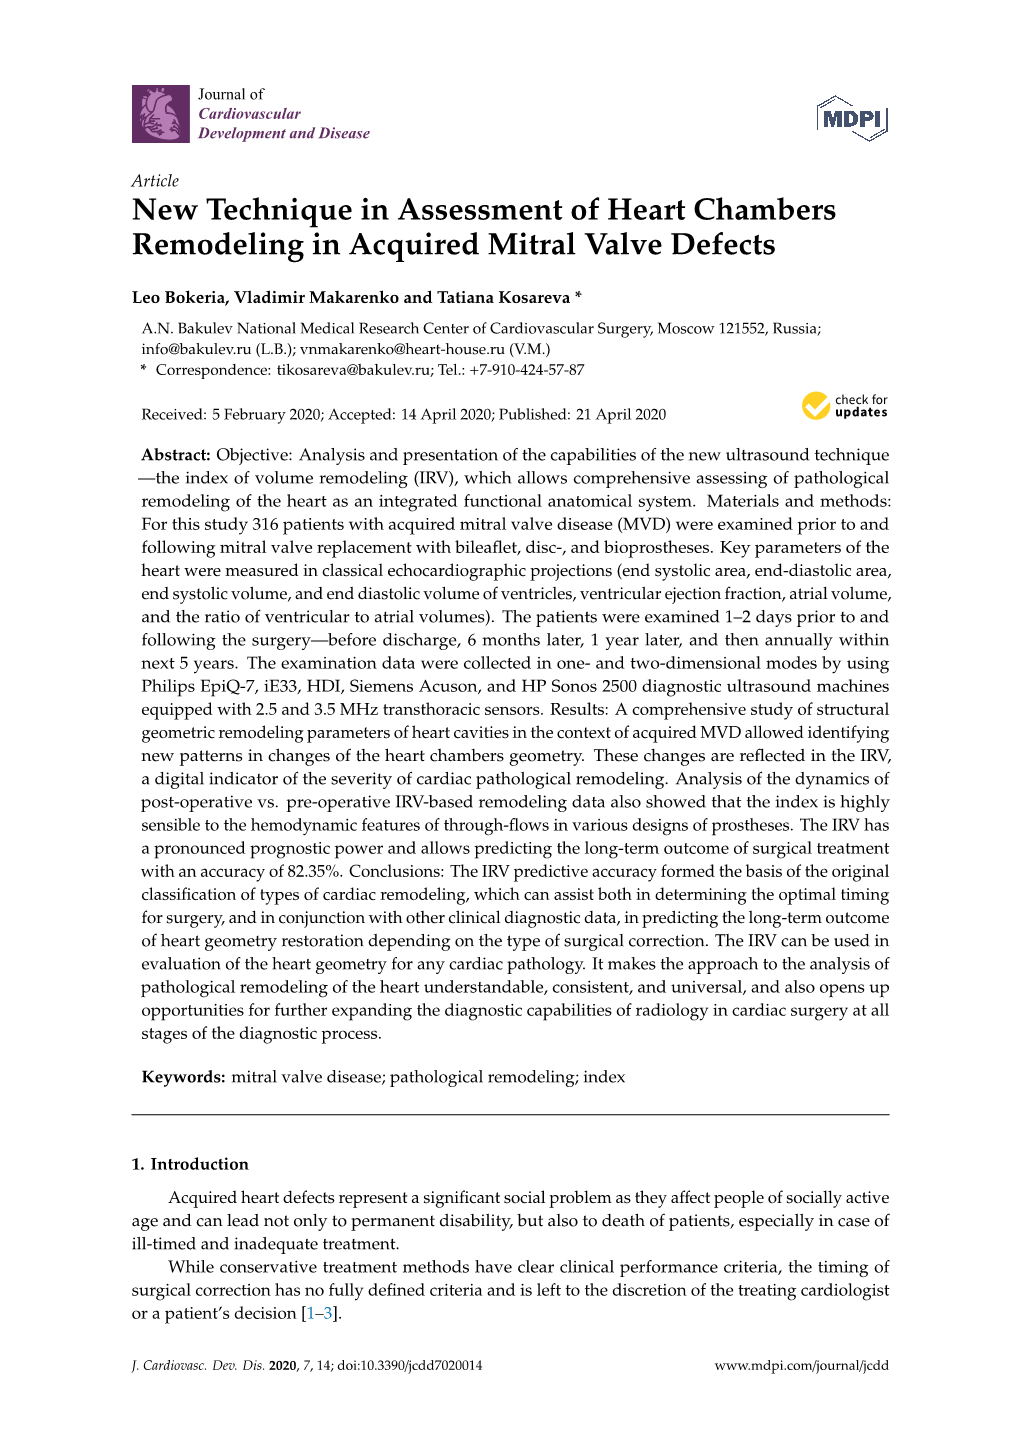 New Technique in Assessment of Heart Chambers Remodeling in Acquired Mitral Valve Defects